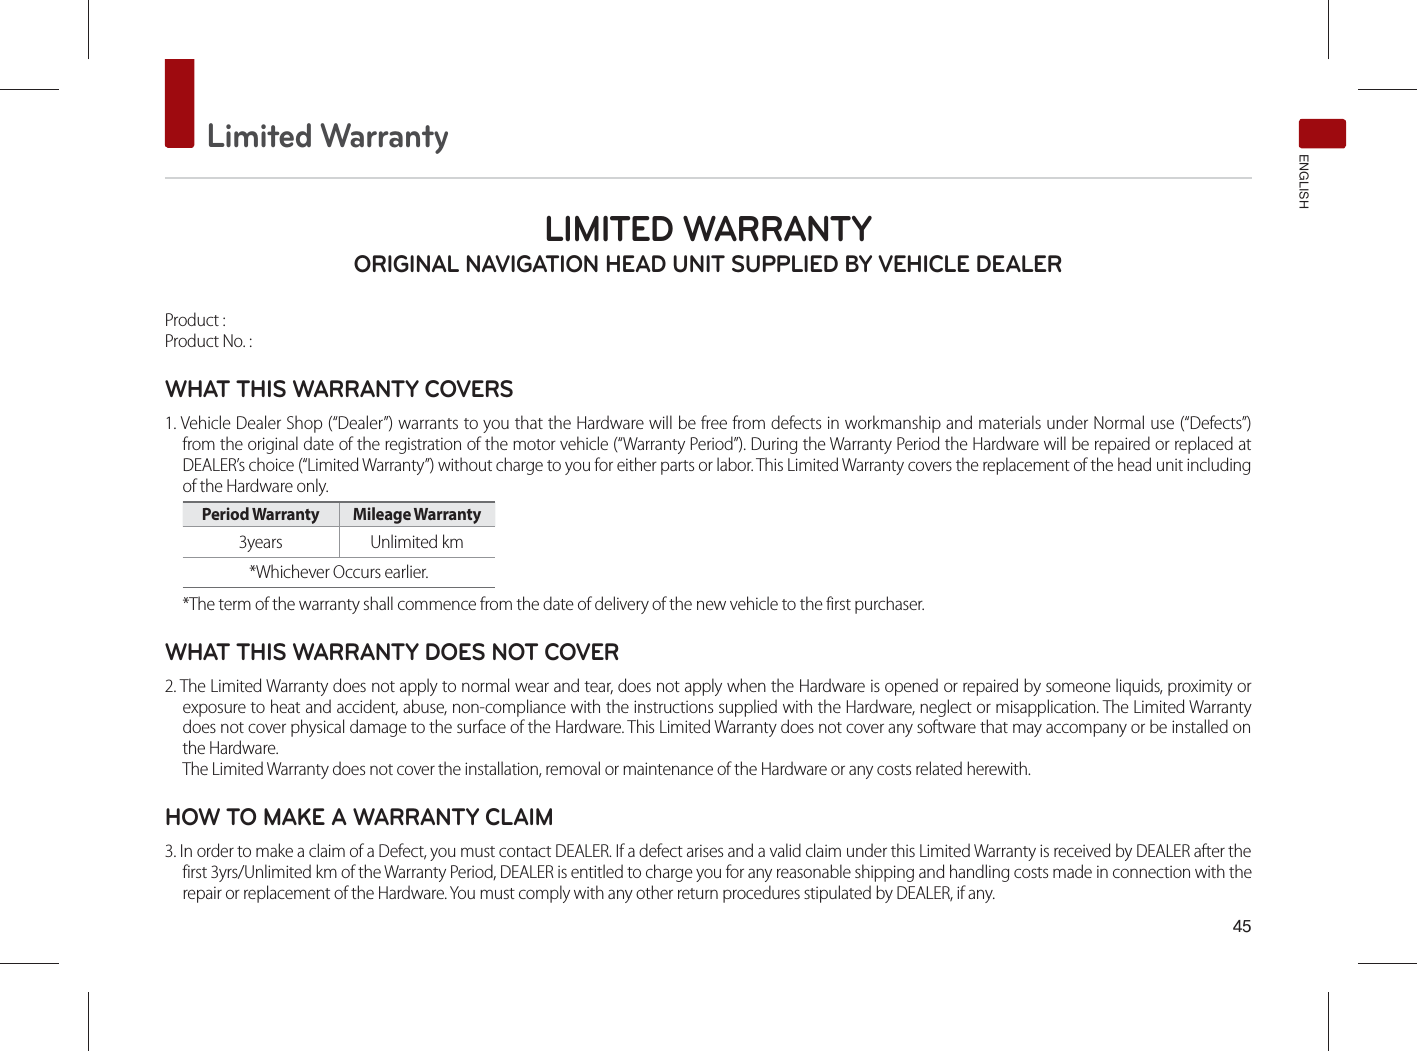 Limited WarrantyENGLISHLIMITED WARRANTY ORIGINAL NAVIGATION HEAD UNIT SUPPLIED BY VEHICLE DEALER Product : Product No. : WHAT THIS WARRANTY COVERS 1. Vehicle Dealer Shop (“Dealer”) warrants to you that the Hardware will be free from defects in workmanship and materials under Normal use (“Defects”) from the original date of the registration of the motor vehicle (“Warranty Period”). During the Warranty Period the Hardware will be repaired or replaced at DEALER’s choice (“Limited Warranty”) without charge to you for either parts or labor. This Limited Warranty covers the replacement of the head unit including of the Hardware only. Period Warranty  Mileage Warranty 3years Unlimited km*Whichever Occurs earlier.*The term of the warranty shall commence from the date of delivery of the new vehicle to the first purchaser.WHAT THIS WARRANTY DOES NOT COVER 2. The Limited Warranty does not apply to normal wear and tear, does not apply when the Hardware is opened or repaired by someone liquids, proximity or exposure to heat and accident, abuse, non-compliance with the instructions supplied with the Hardware, neglect or misapplication. The Limited Warranty does not cover physical damage to the surface of the Hardware. This Limited Warranty does not cover any software that may accompany or be installed on the Hardware. The Limited Warranty does not cover the installation, removal or maintenance of the Hardware or any costs related herewith.HOW TO MAKE A WARRANTY CLAIM3. In order to make a claim of a Defect, you must contact DEALER. If a defect arises and a valid claim under this Limited Warranty is received by DEALER after the first 3yrs/Unlimited km of the Warranty Period, DEALER is entitled to charge you for any reasonable shipping and handling costs made in connection with the repair or replacement of the Hardware. You must comply with any other return procedures stipulated by DEALER, if any.